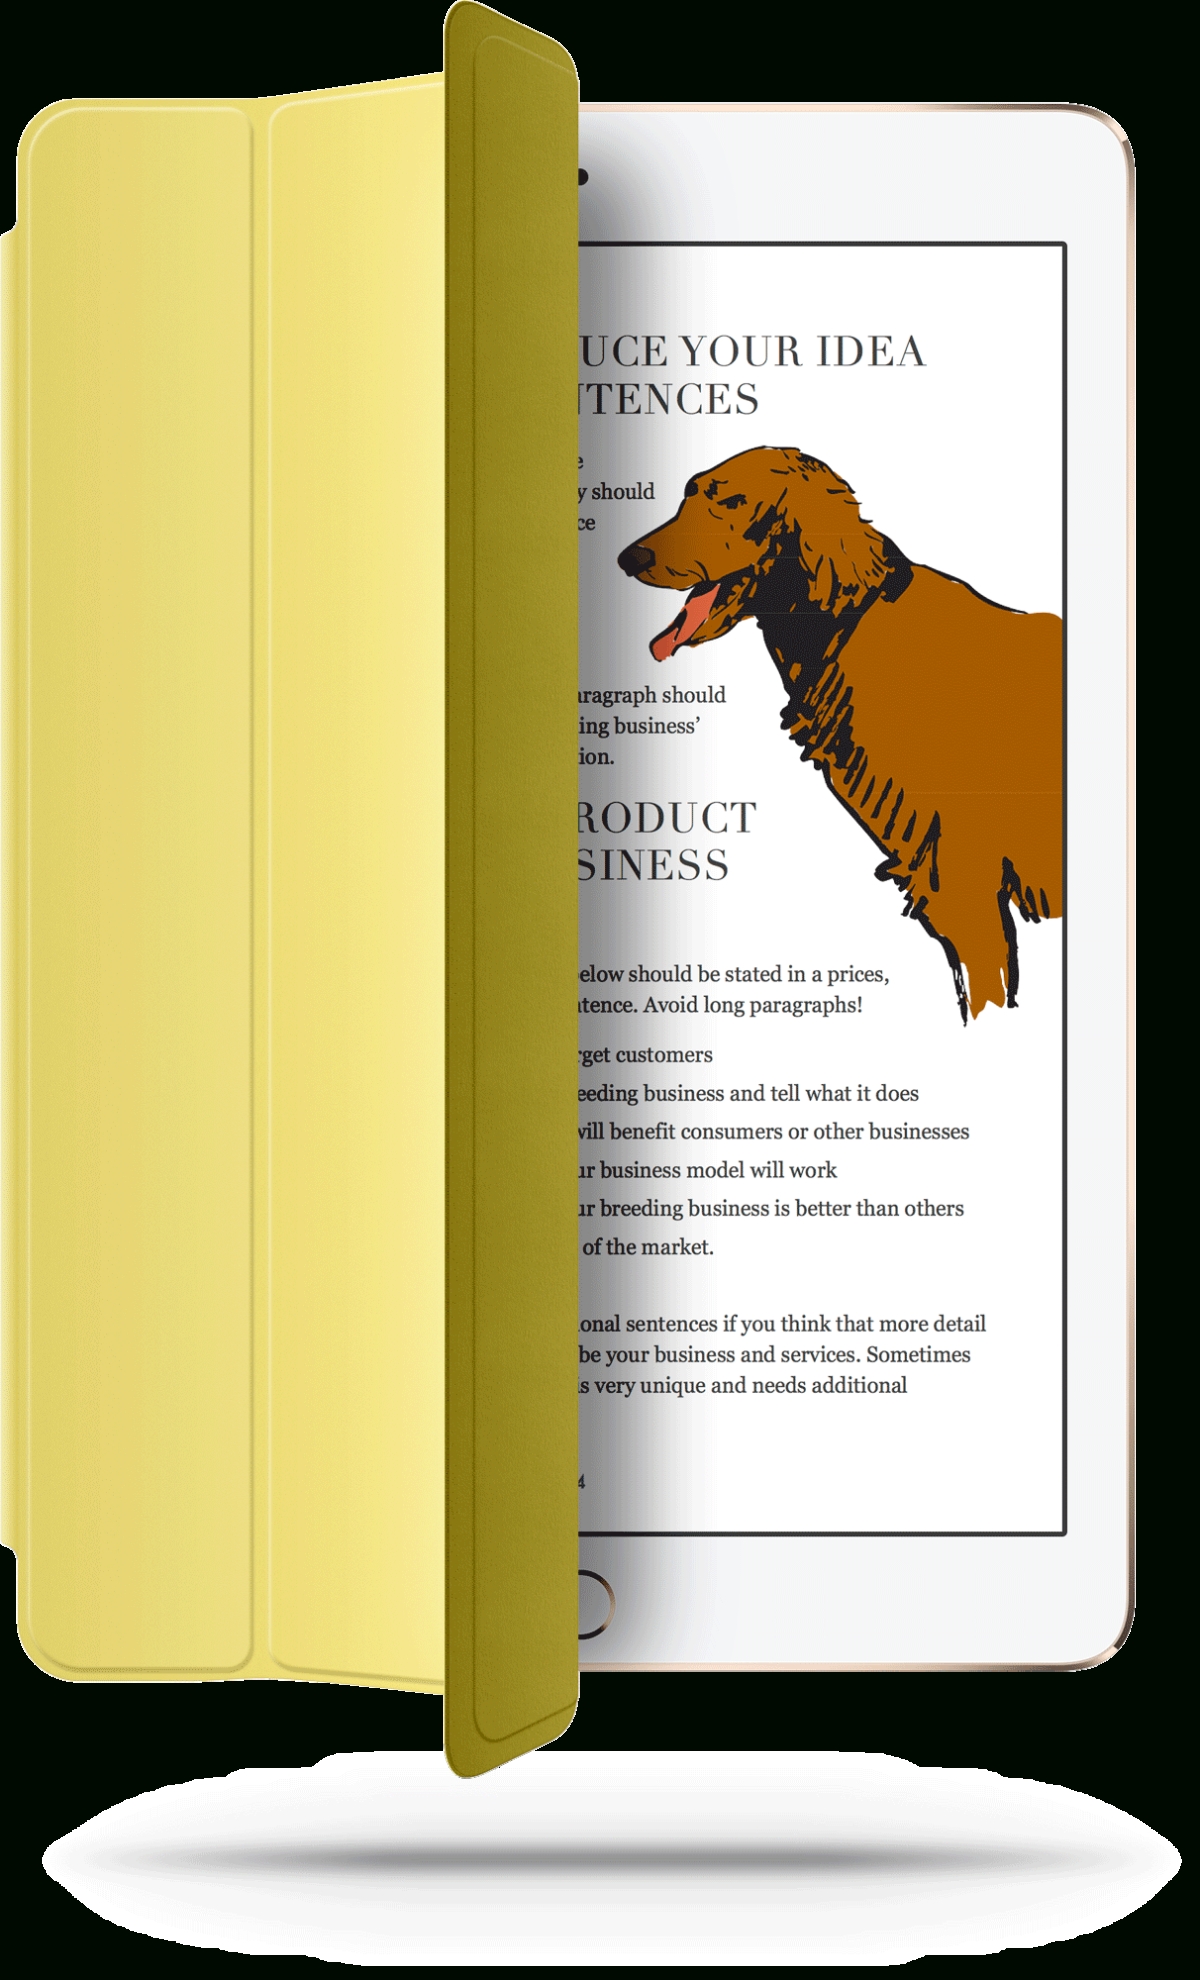 Writing Your Dog Breeding Business Plan Made Super Easy! Regarding Dog Breeding Business Plan Template